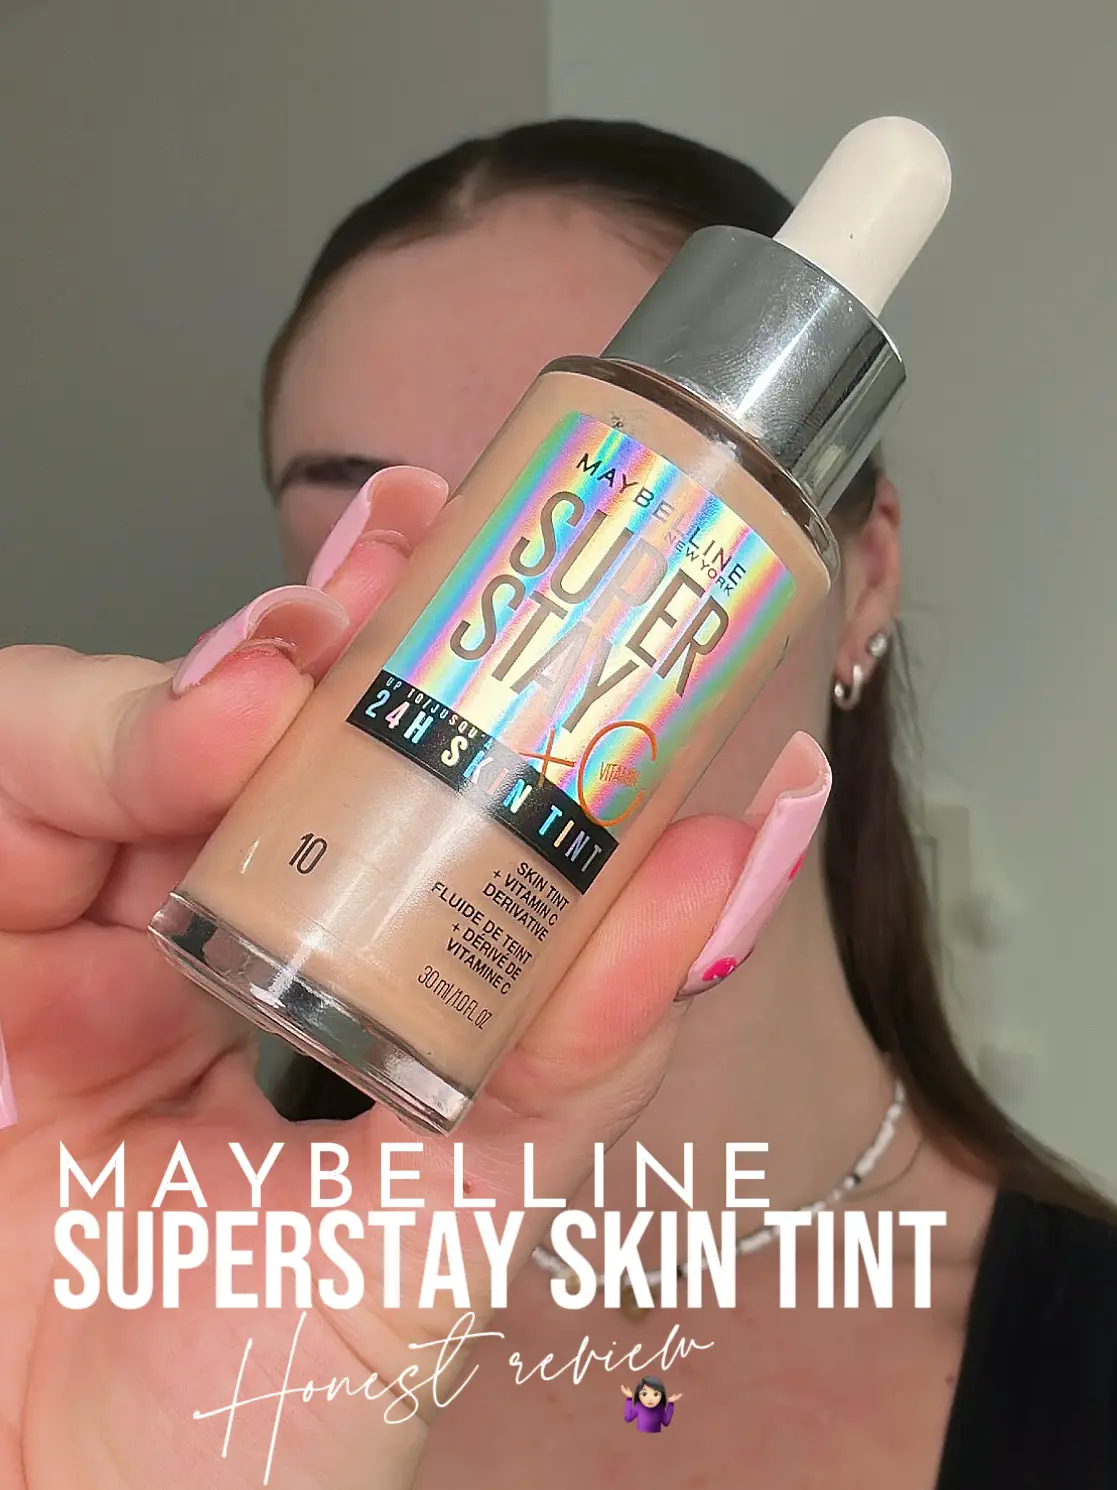 Maybelline Super Stay 24HR Skin Tint Review